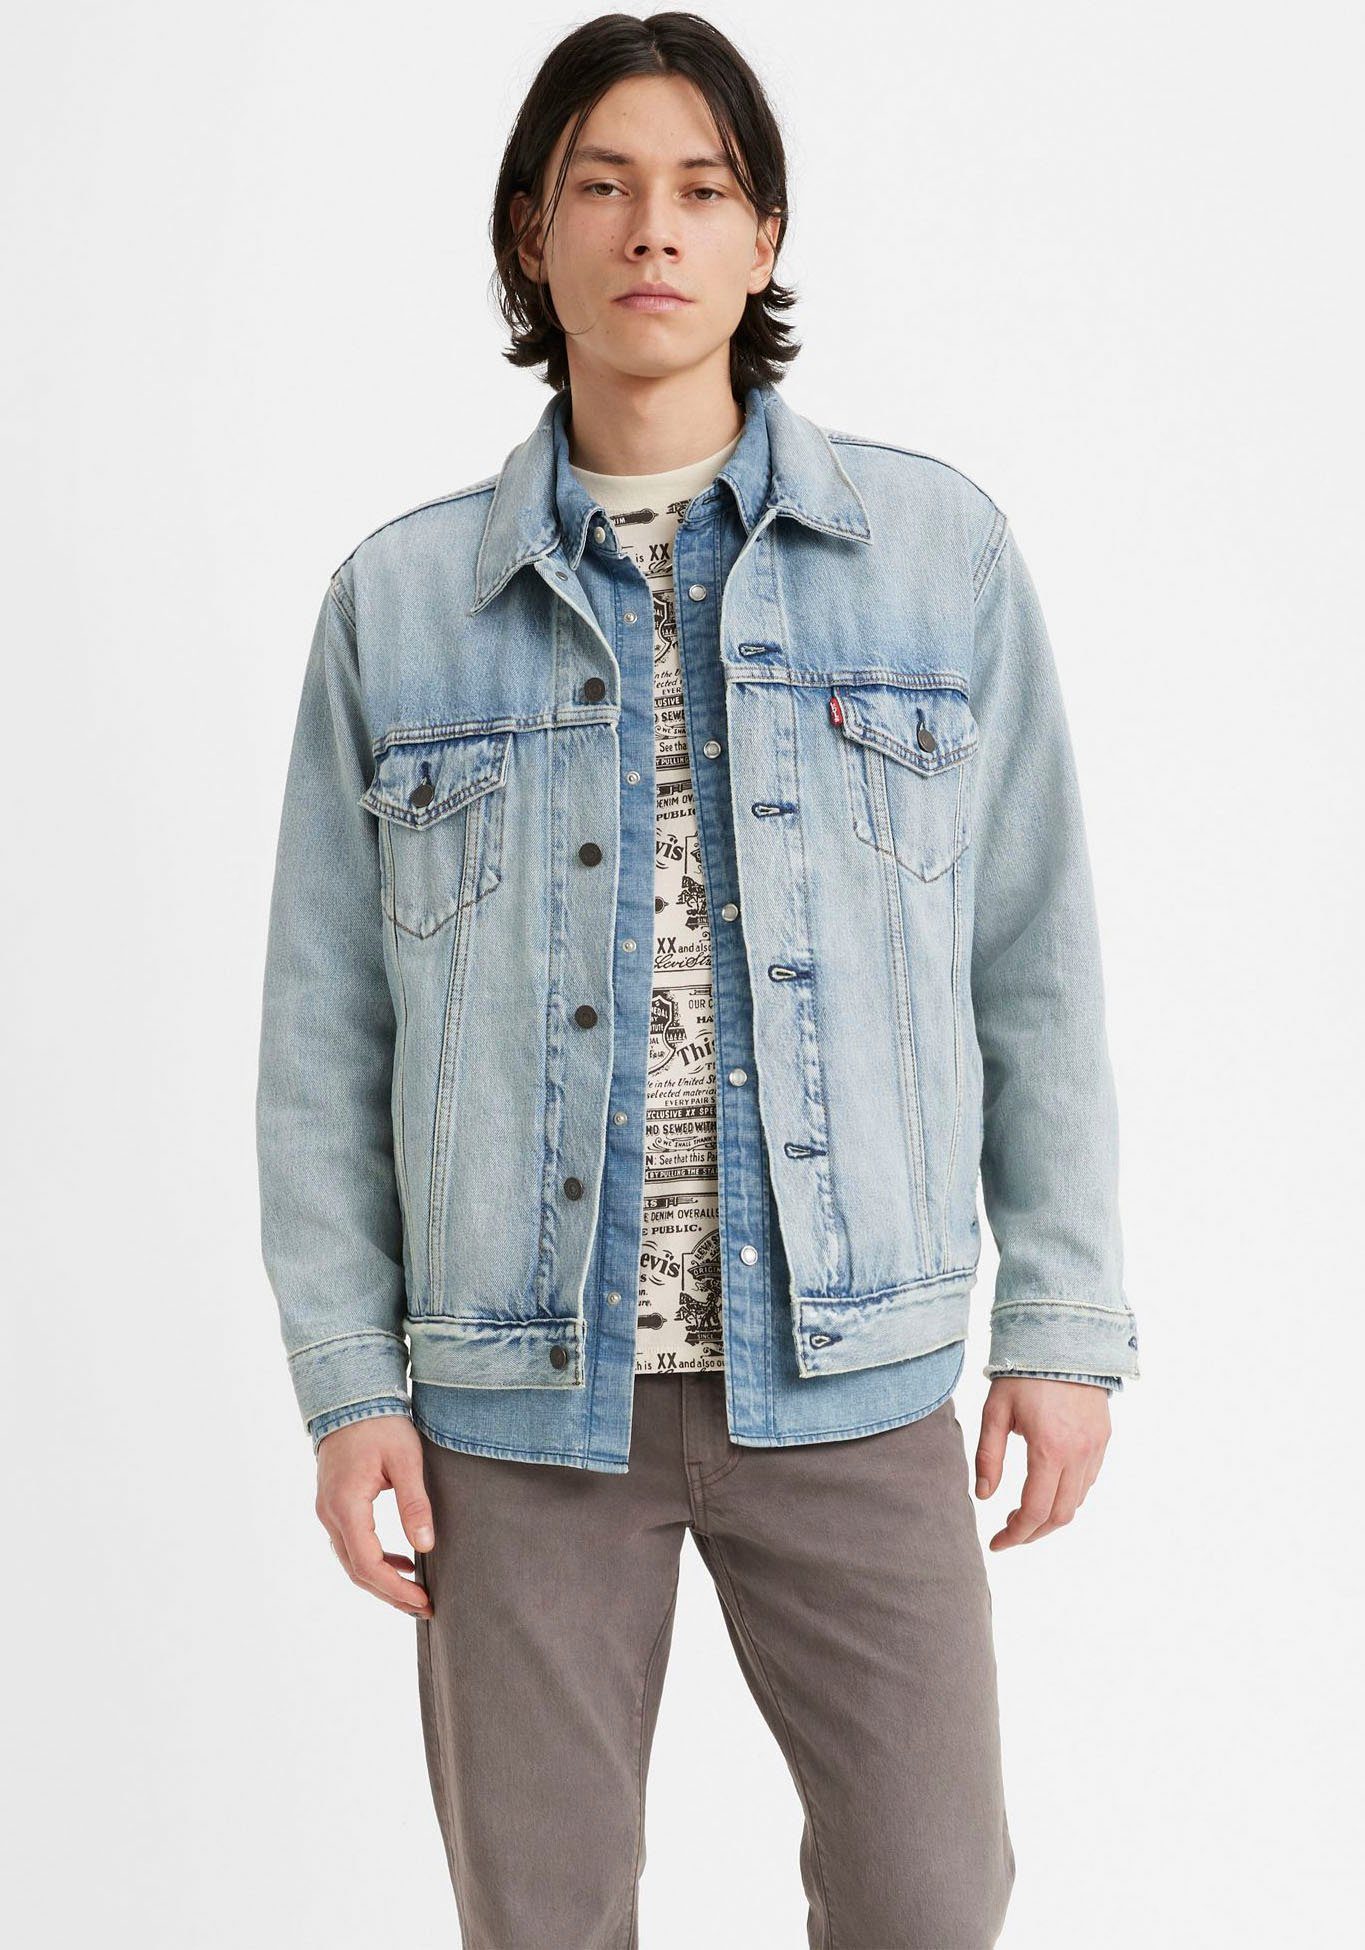 huron FIT NEW RELAXED TRUCK Levi's® Jeansjacke waves